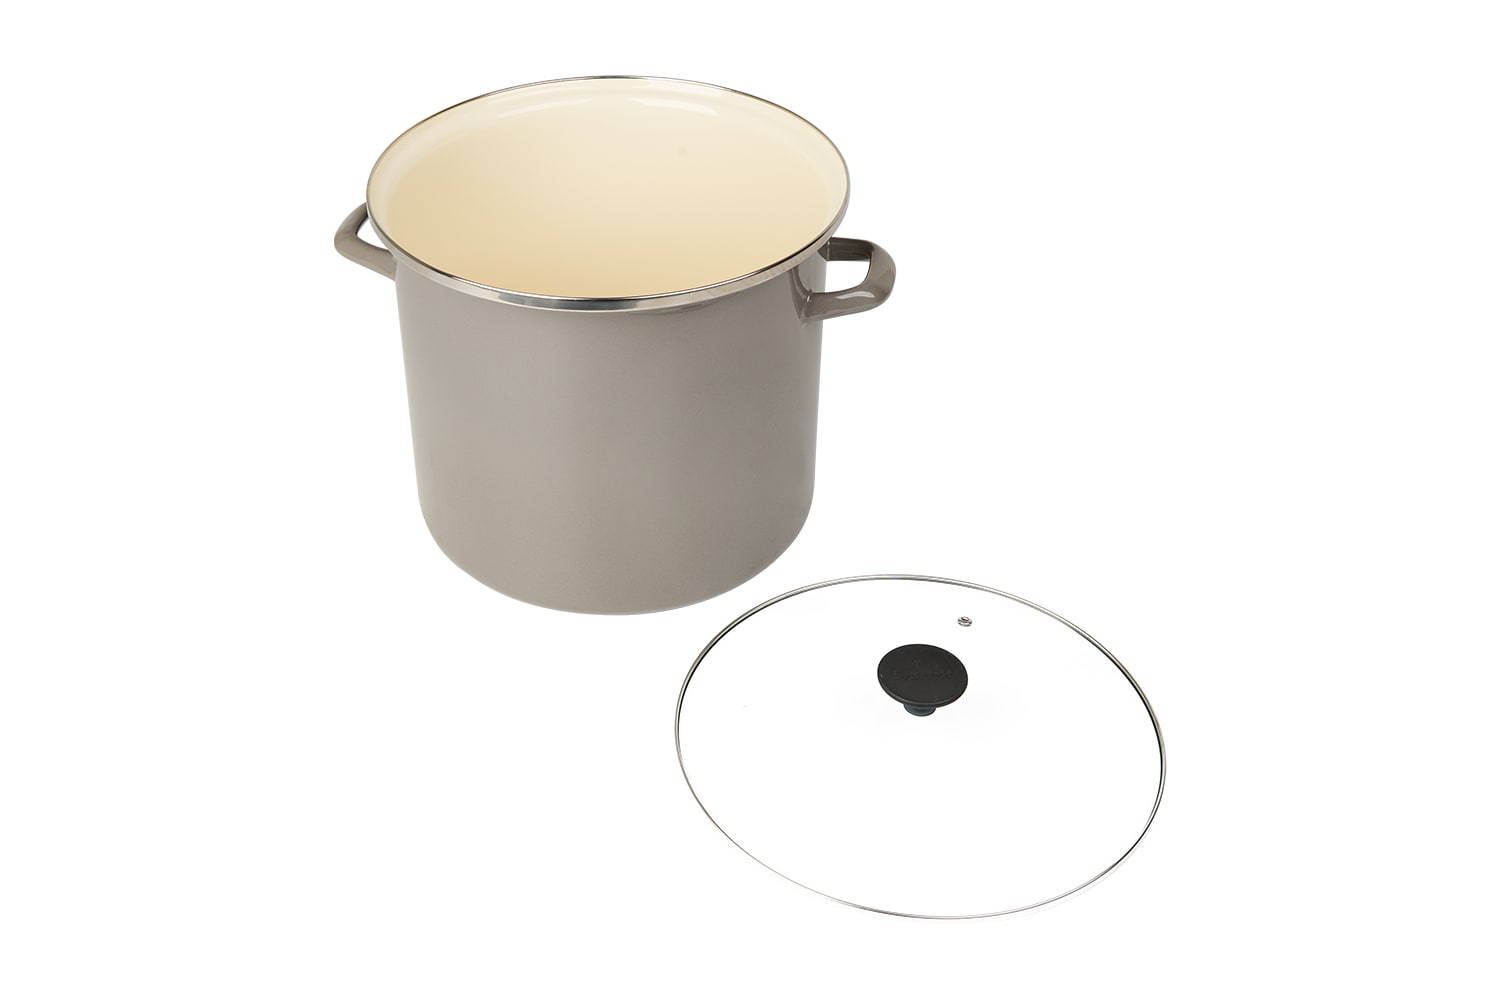 28 Cookware Enameled steel pot with Handle and lid, XL large, Specialty Nonstick